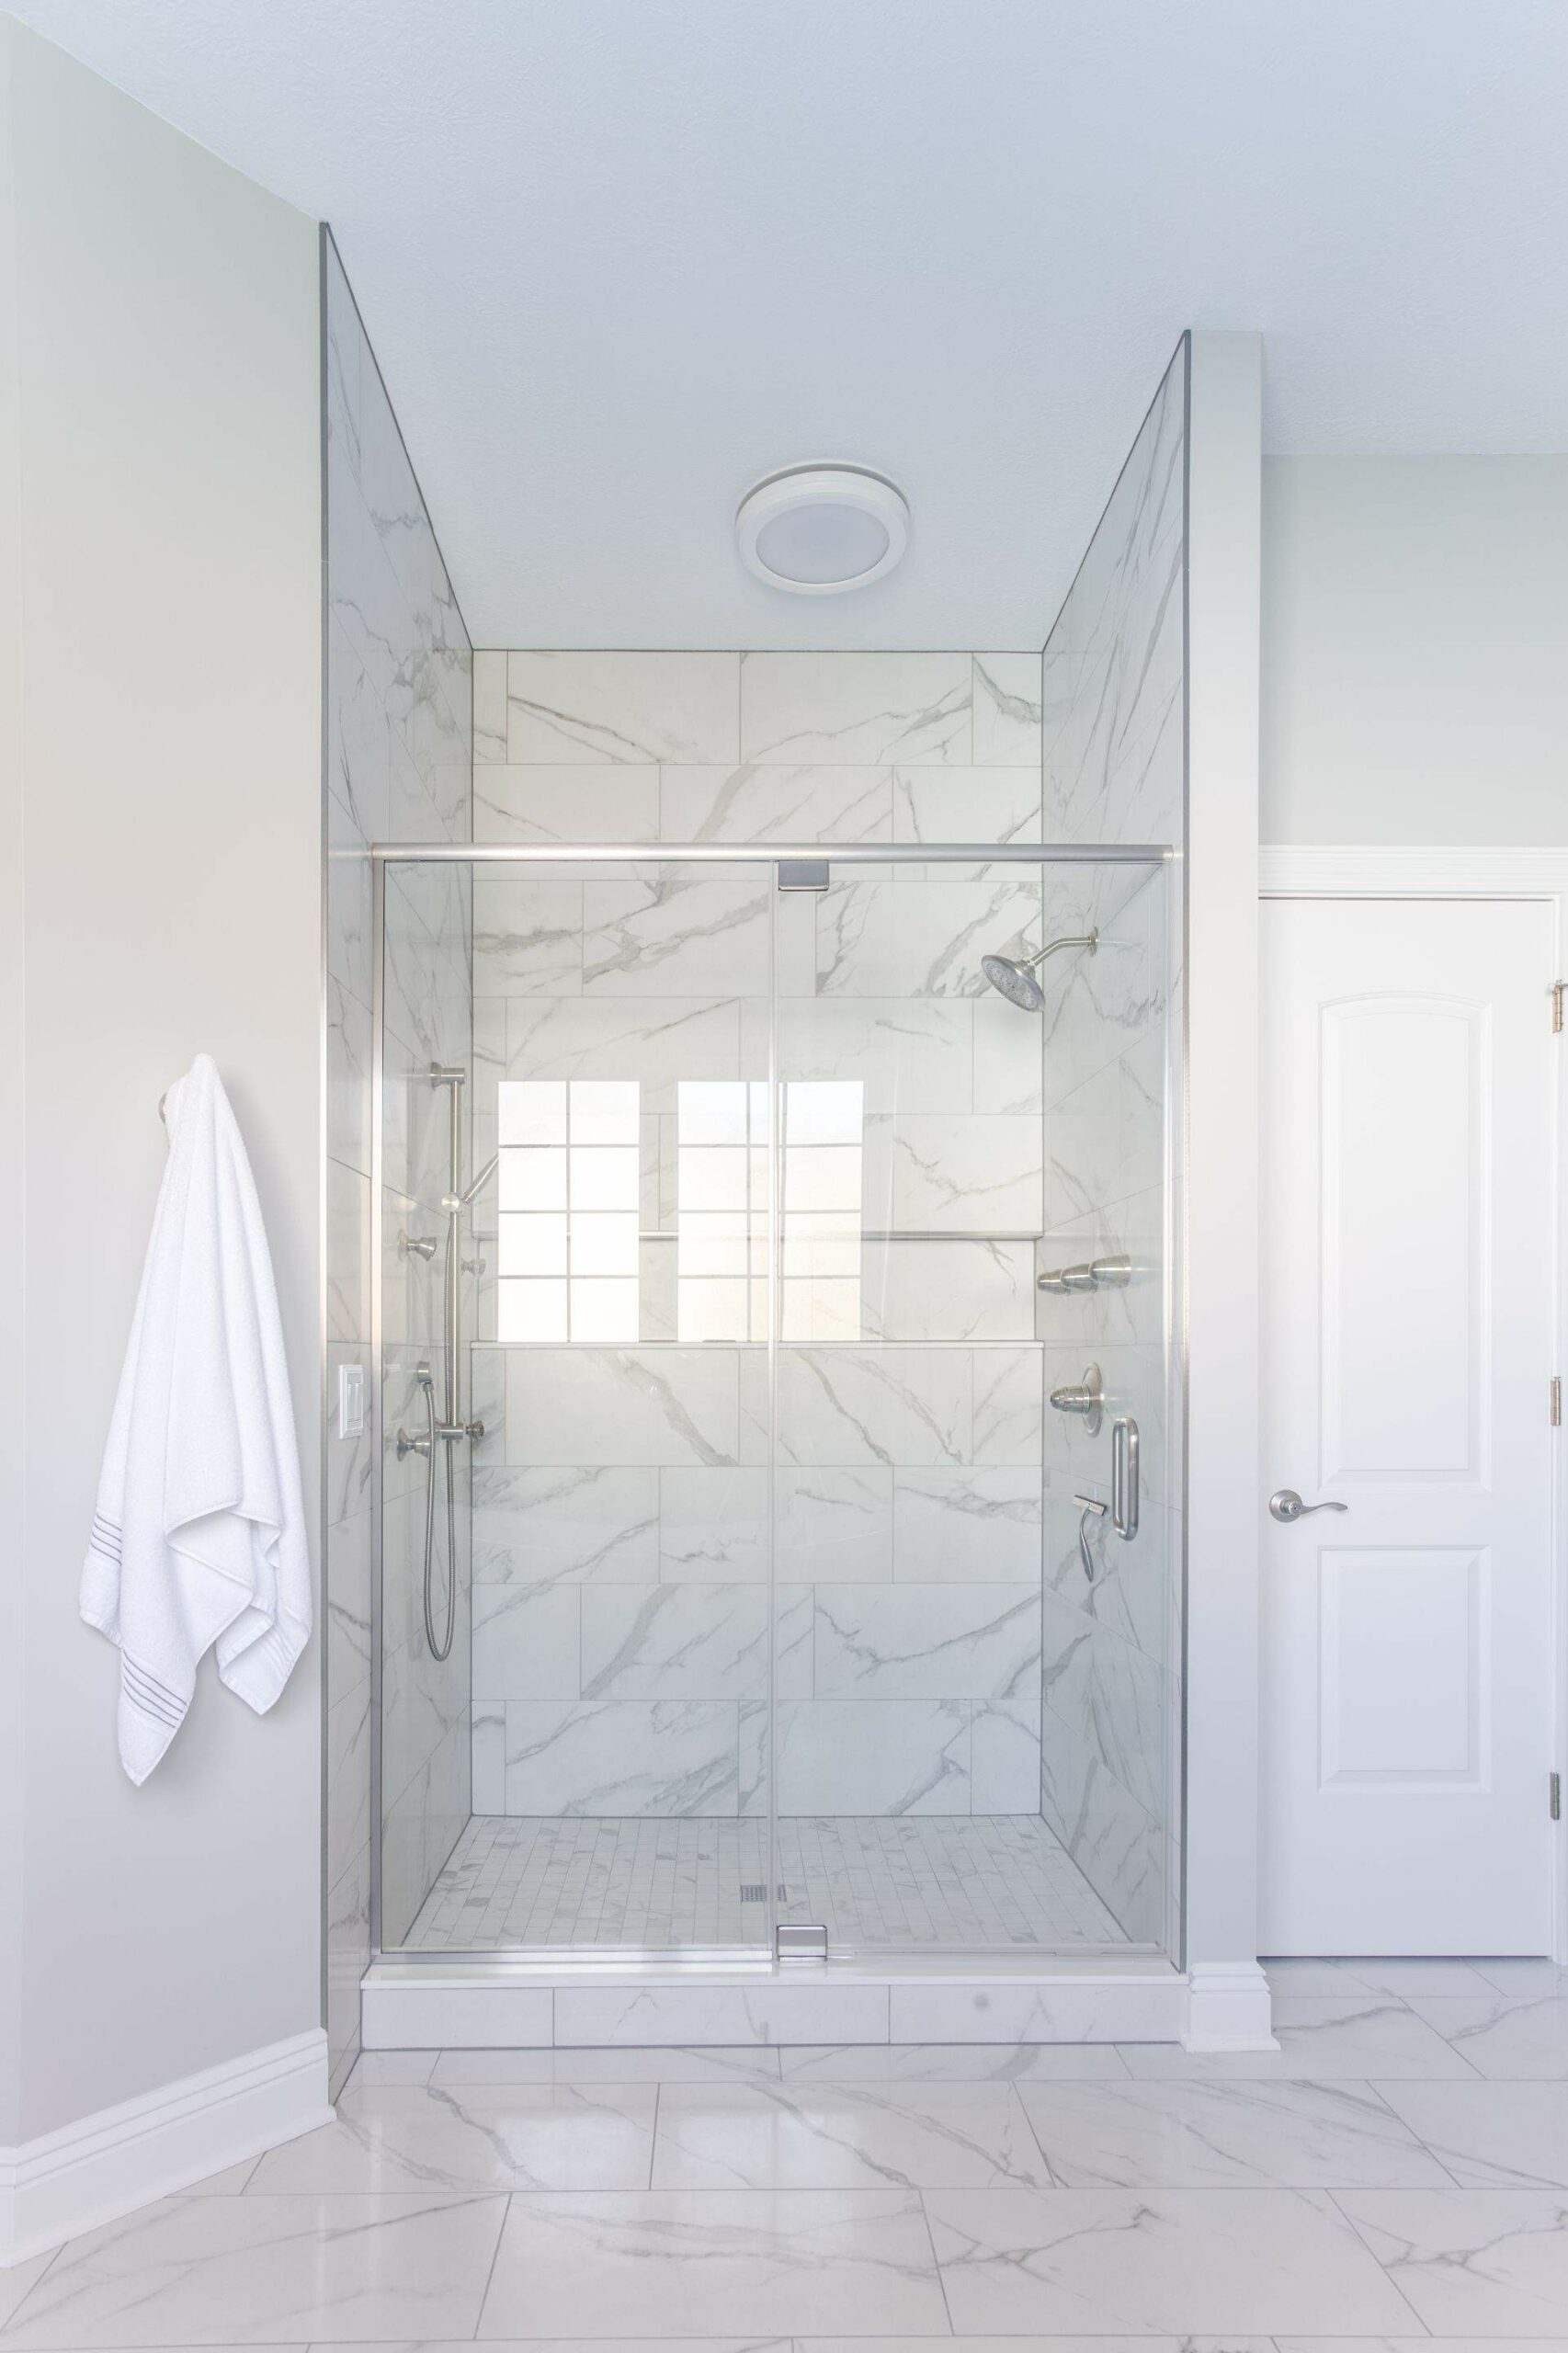 A light and airy bathroom after renovation, featuring white marble tiles on bathroom floor and shower walls. A glass shower door adds a sense of space